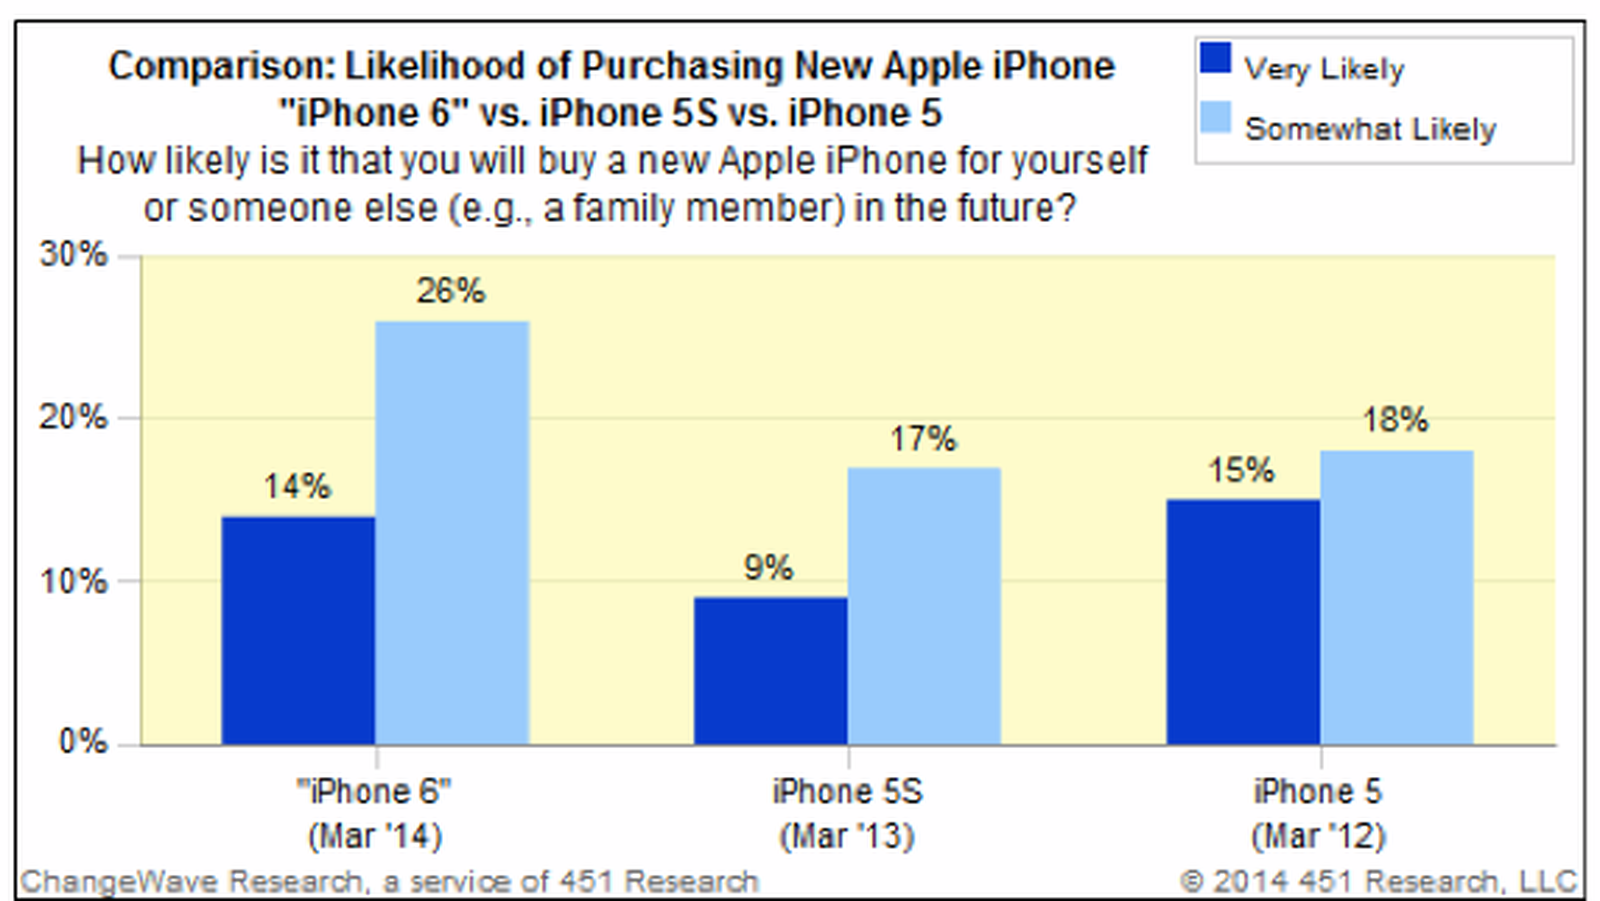 Survey Shows Strong Consumer Interest in Larger-Screen iPhone 6 - MacRumors